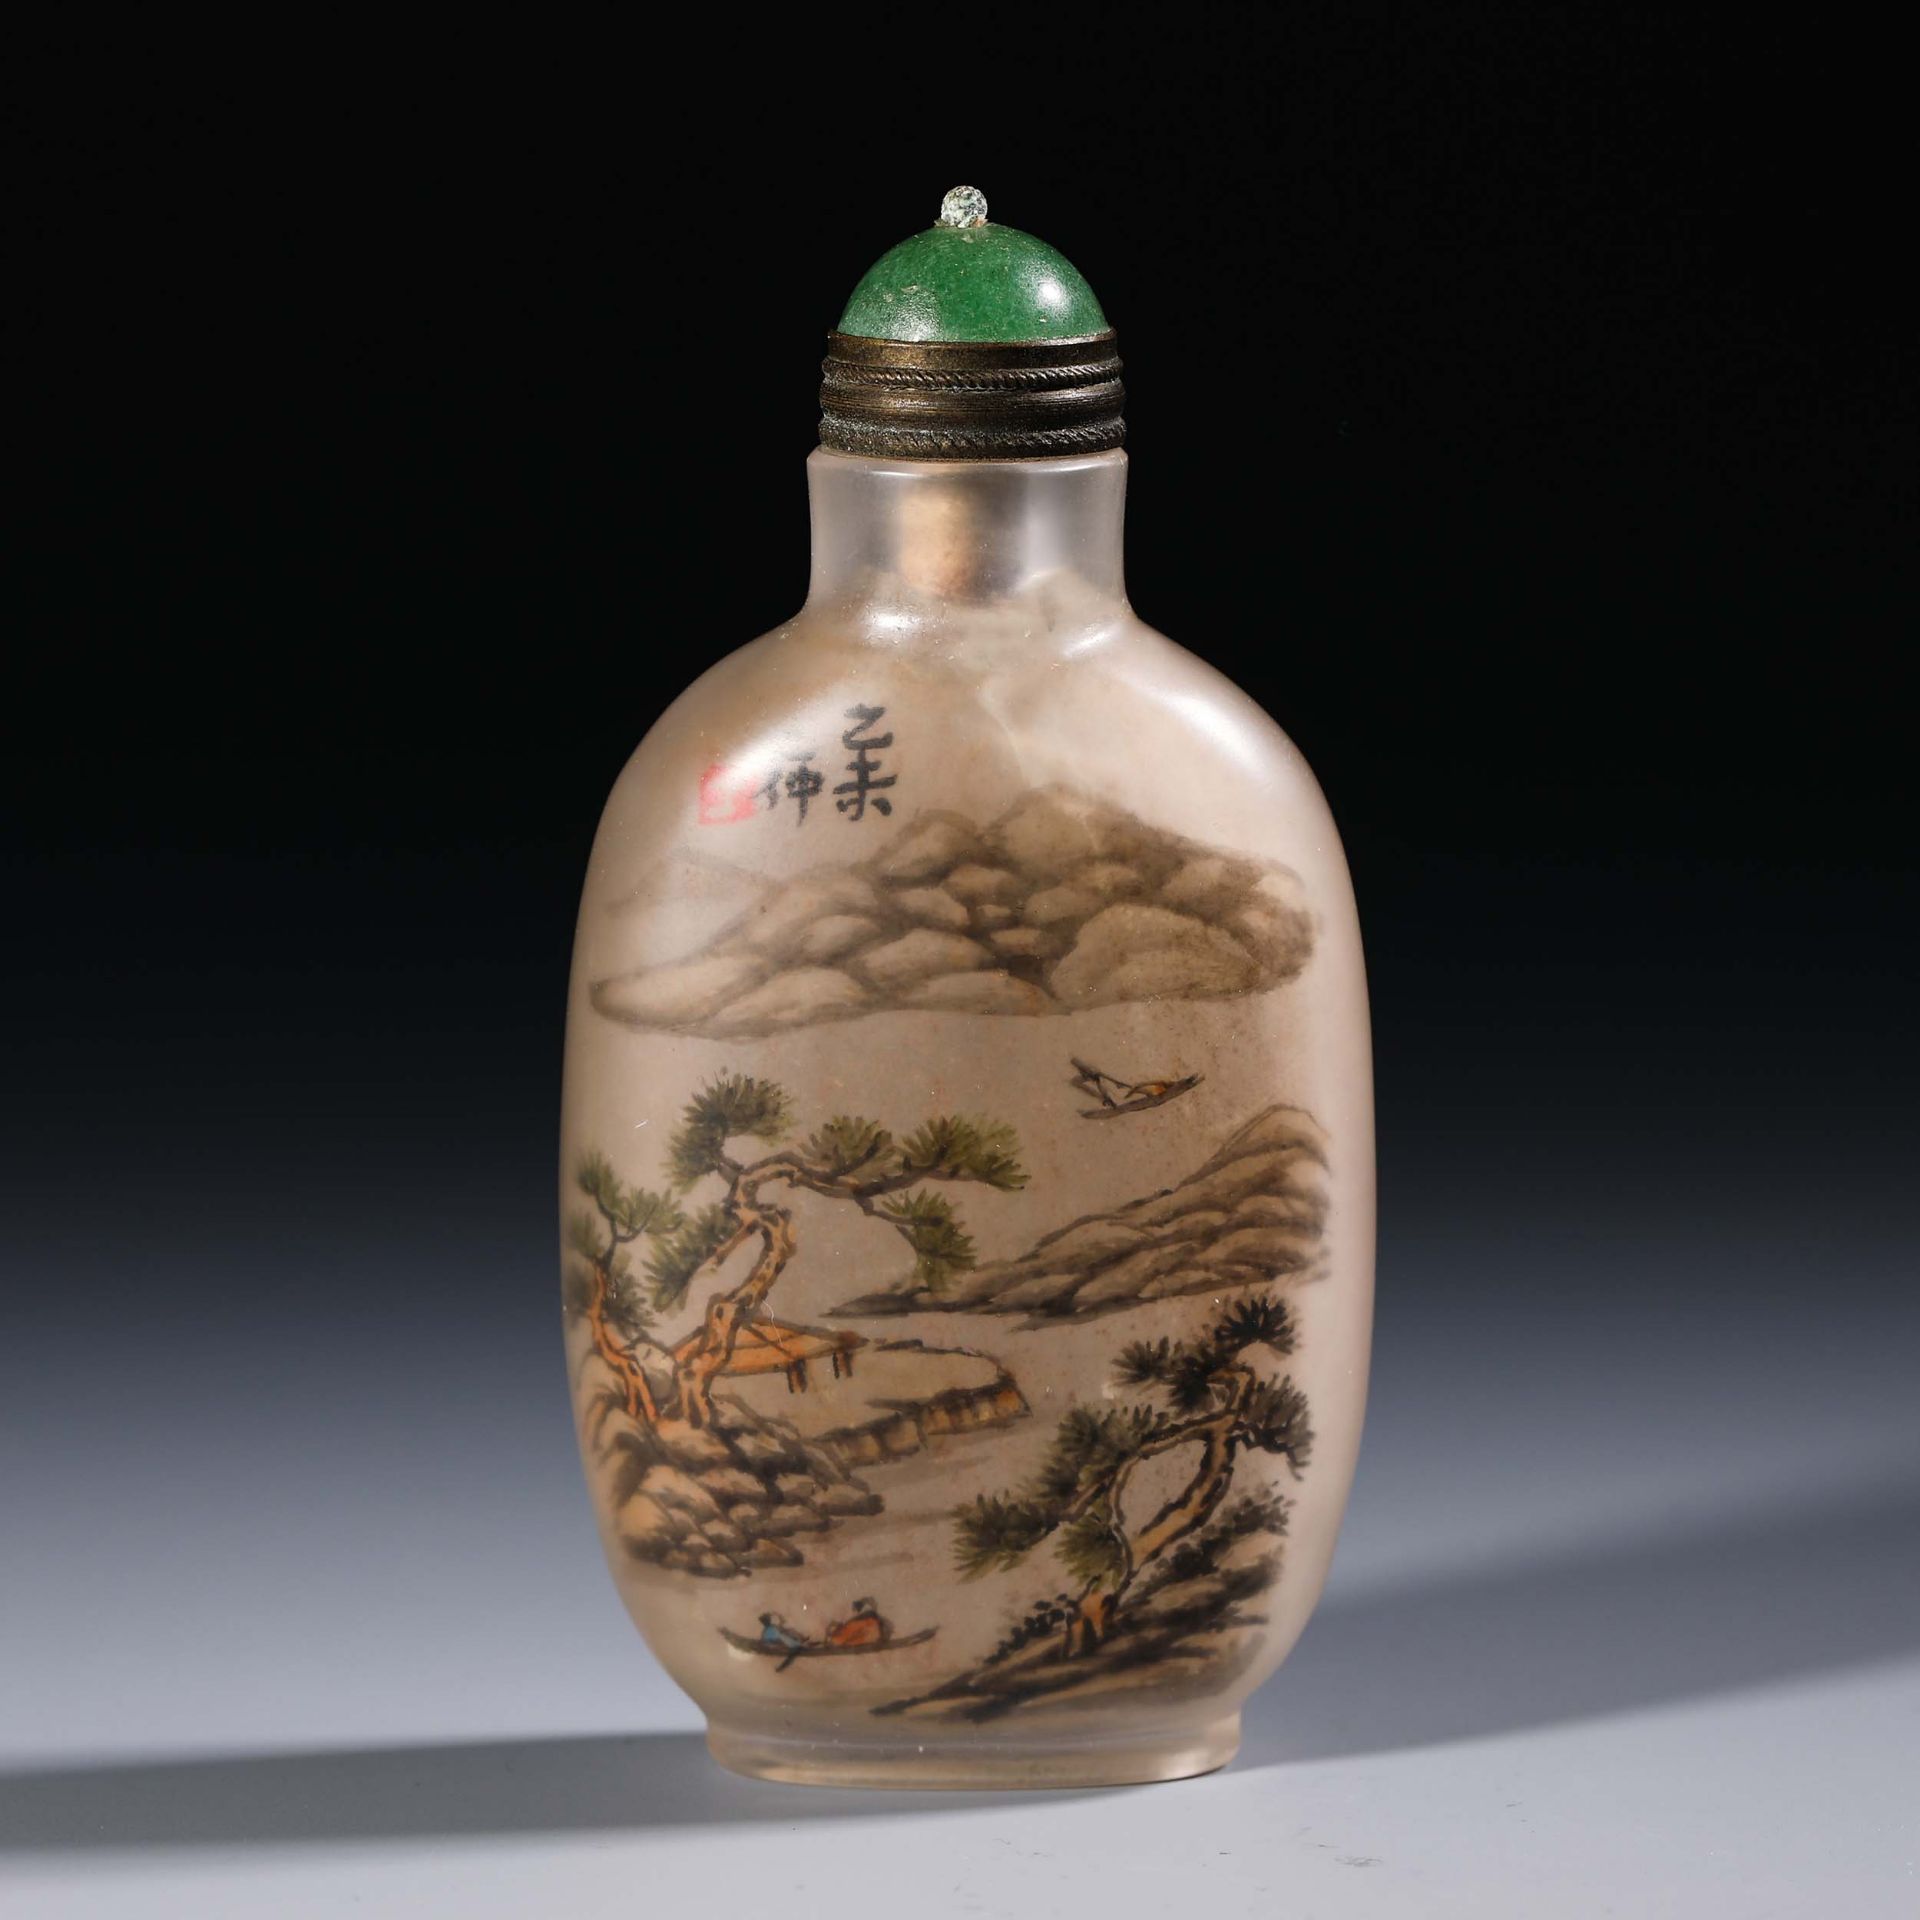 Qing dynasty inner painting snuff bottle